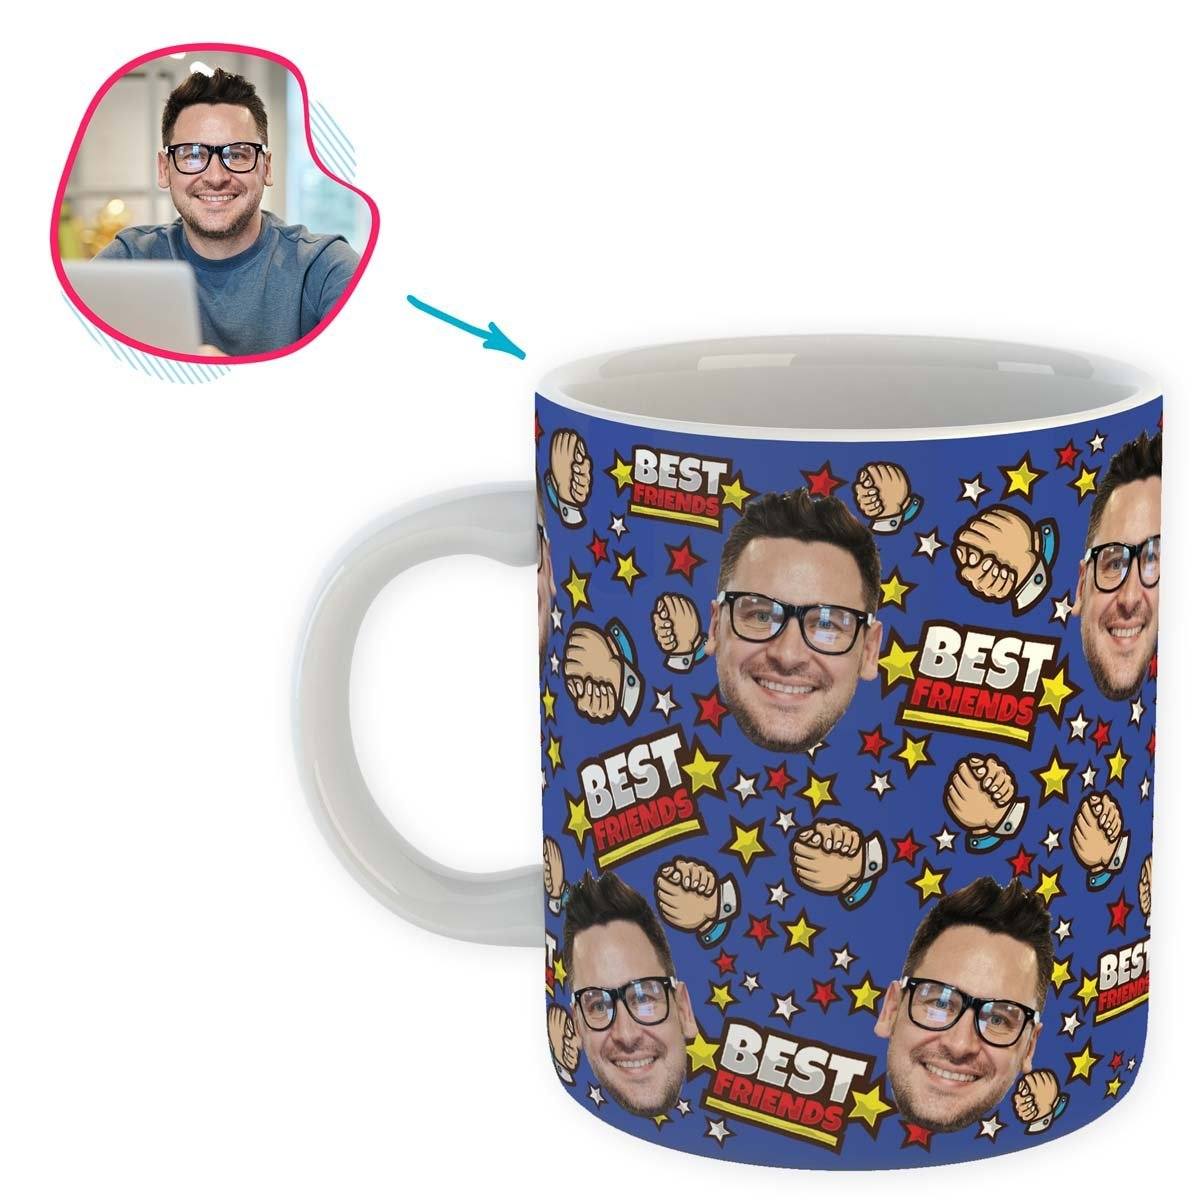 darkblue Best Friends mug personalized with photo of face printed on it